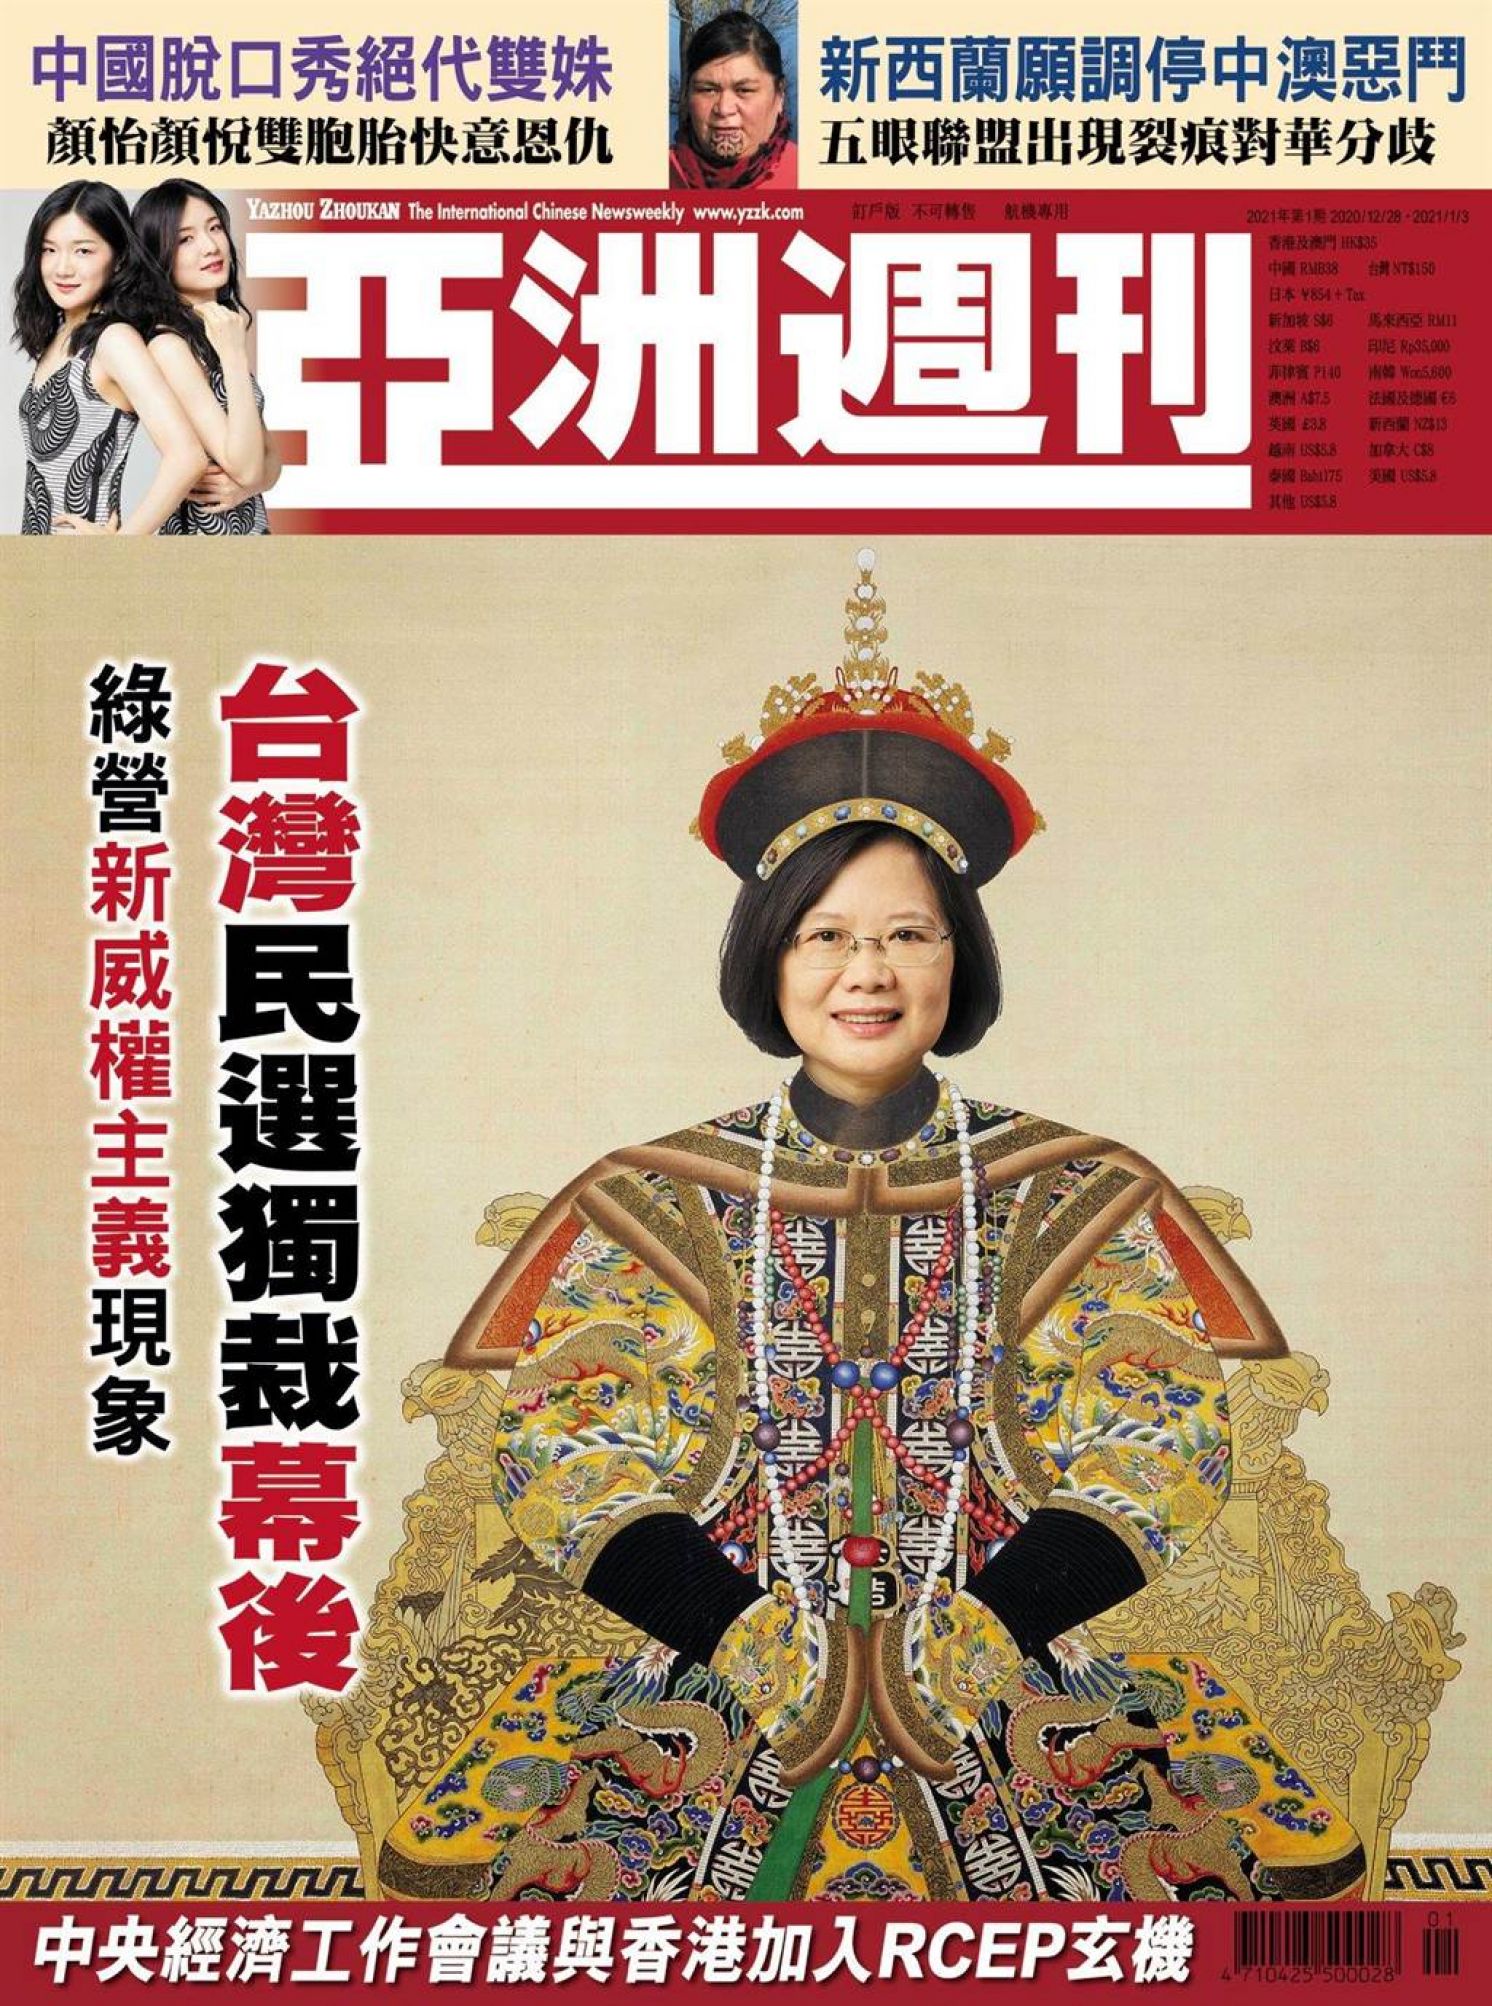 Portrayal of Tsai as Elected Dictator Not Ungrounded